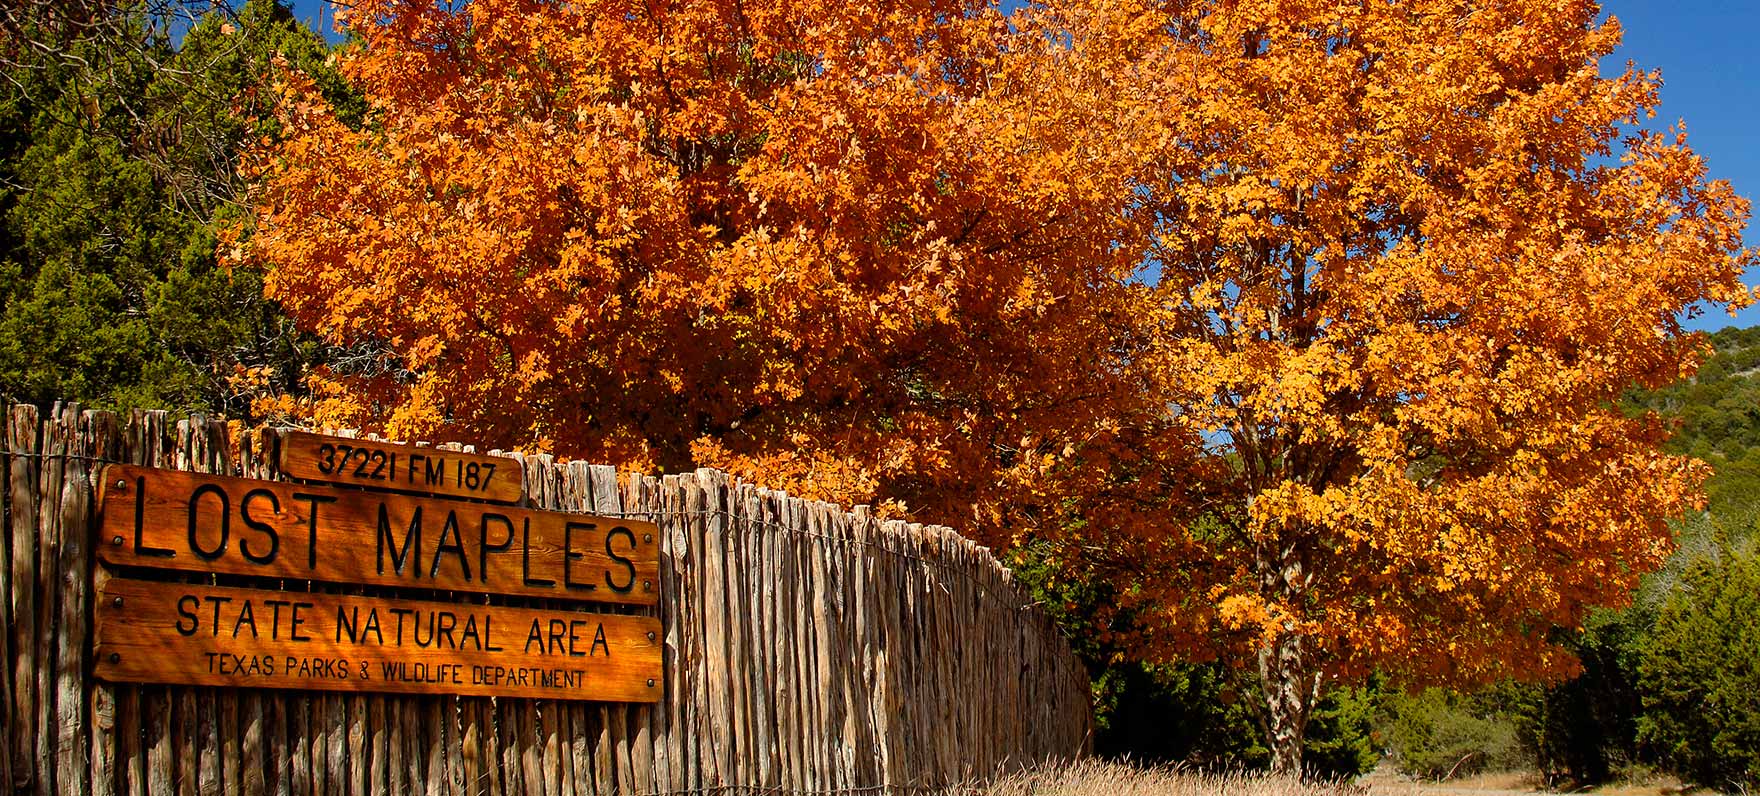 Fall Foliage in Texas: Finding Lost Maples